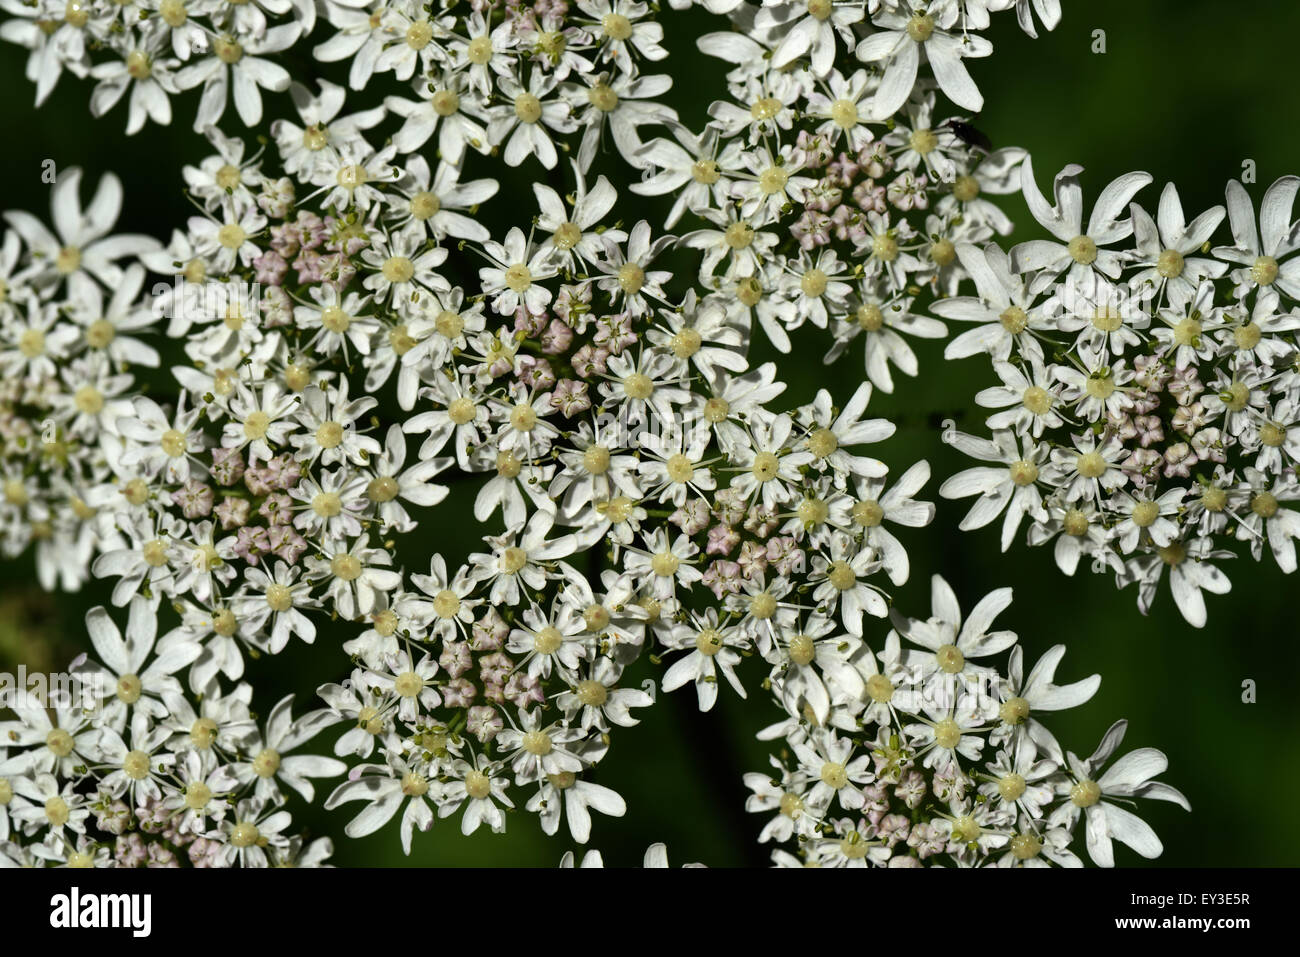 A hogweed, Heracleum sphondylium, flower showing an intricate pattern of white florets, Berkshire, June Stock Photo